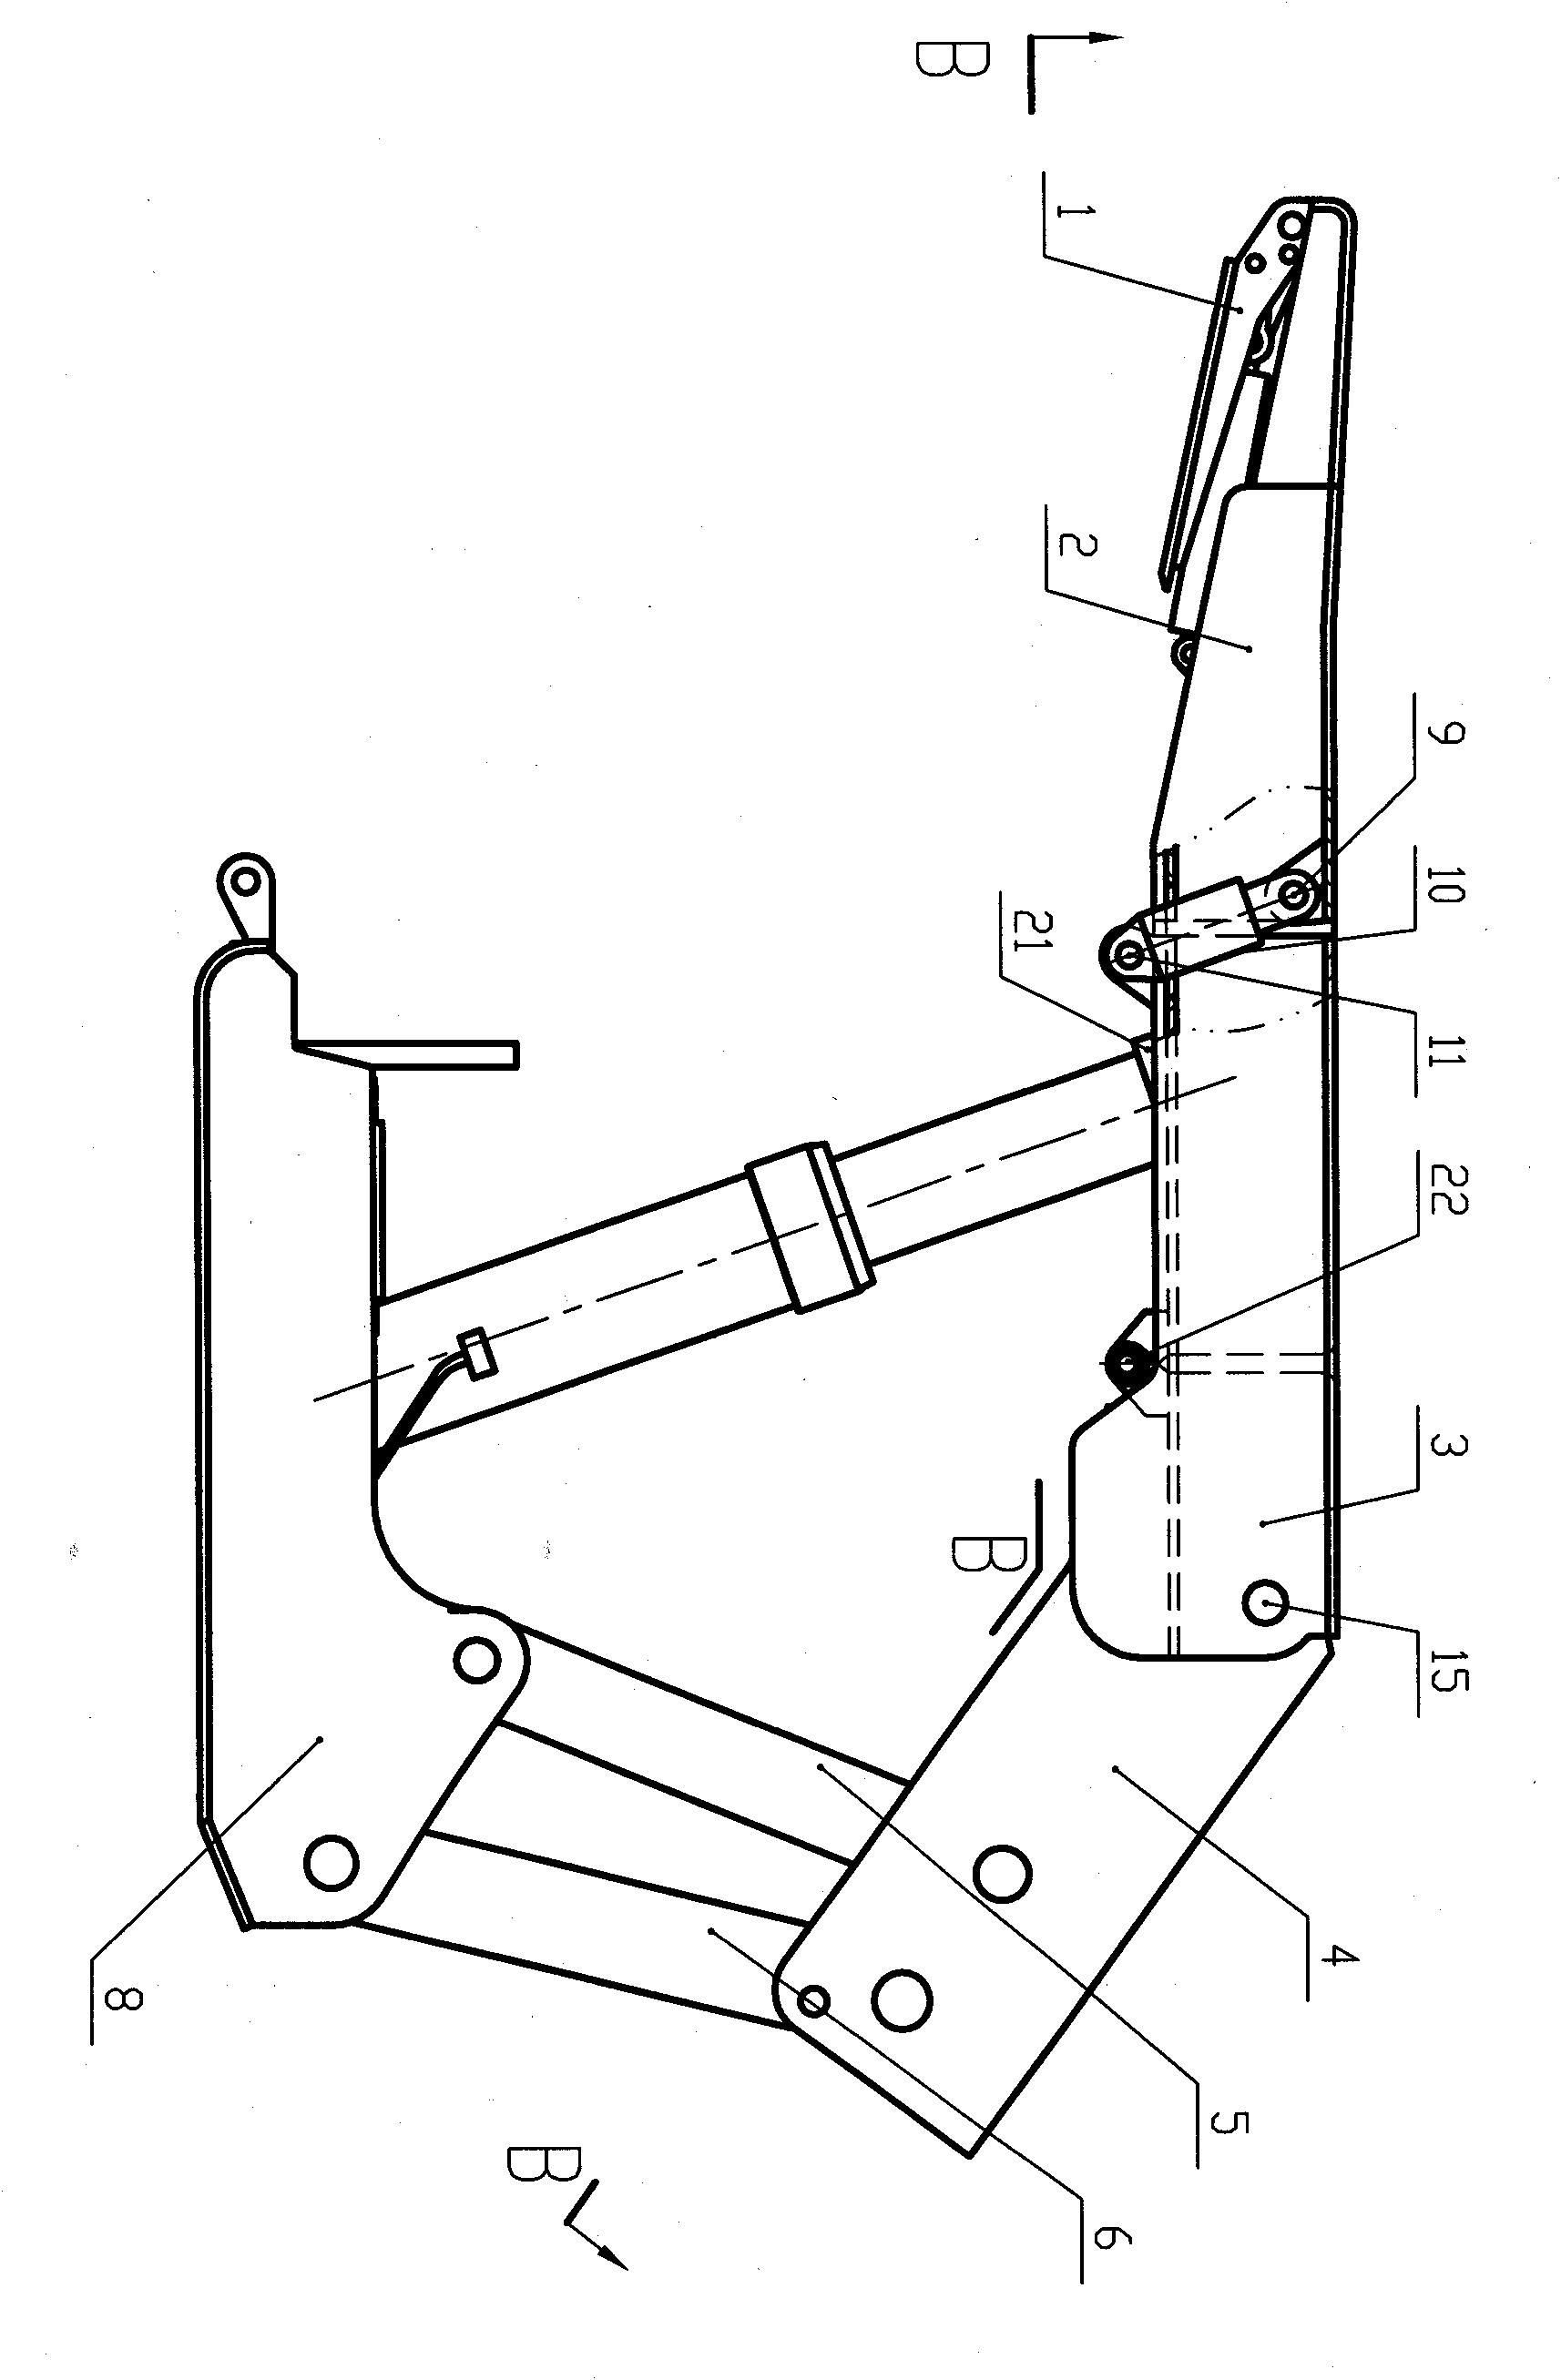 Top beam of hydraulic support